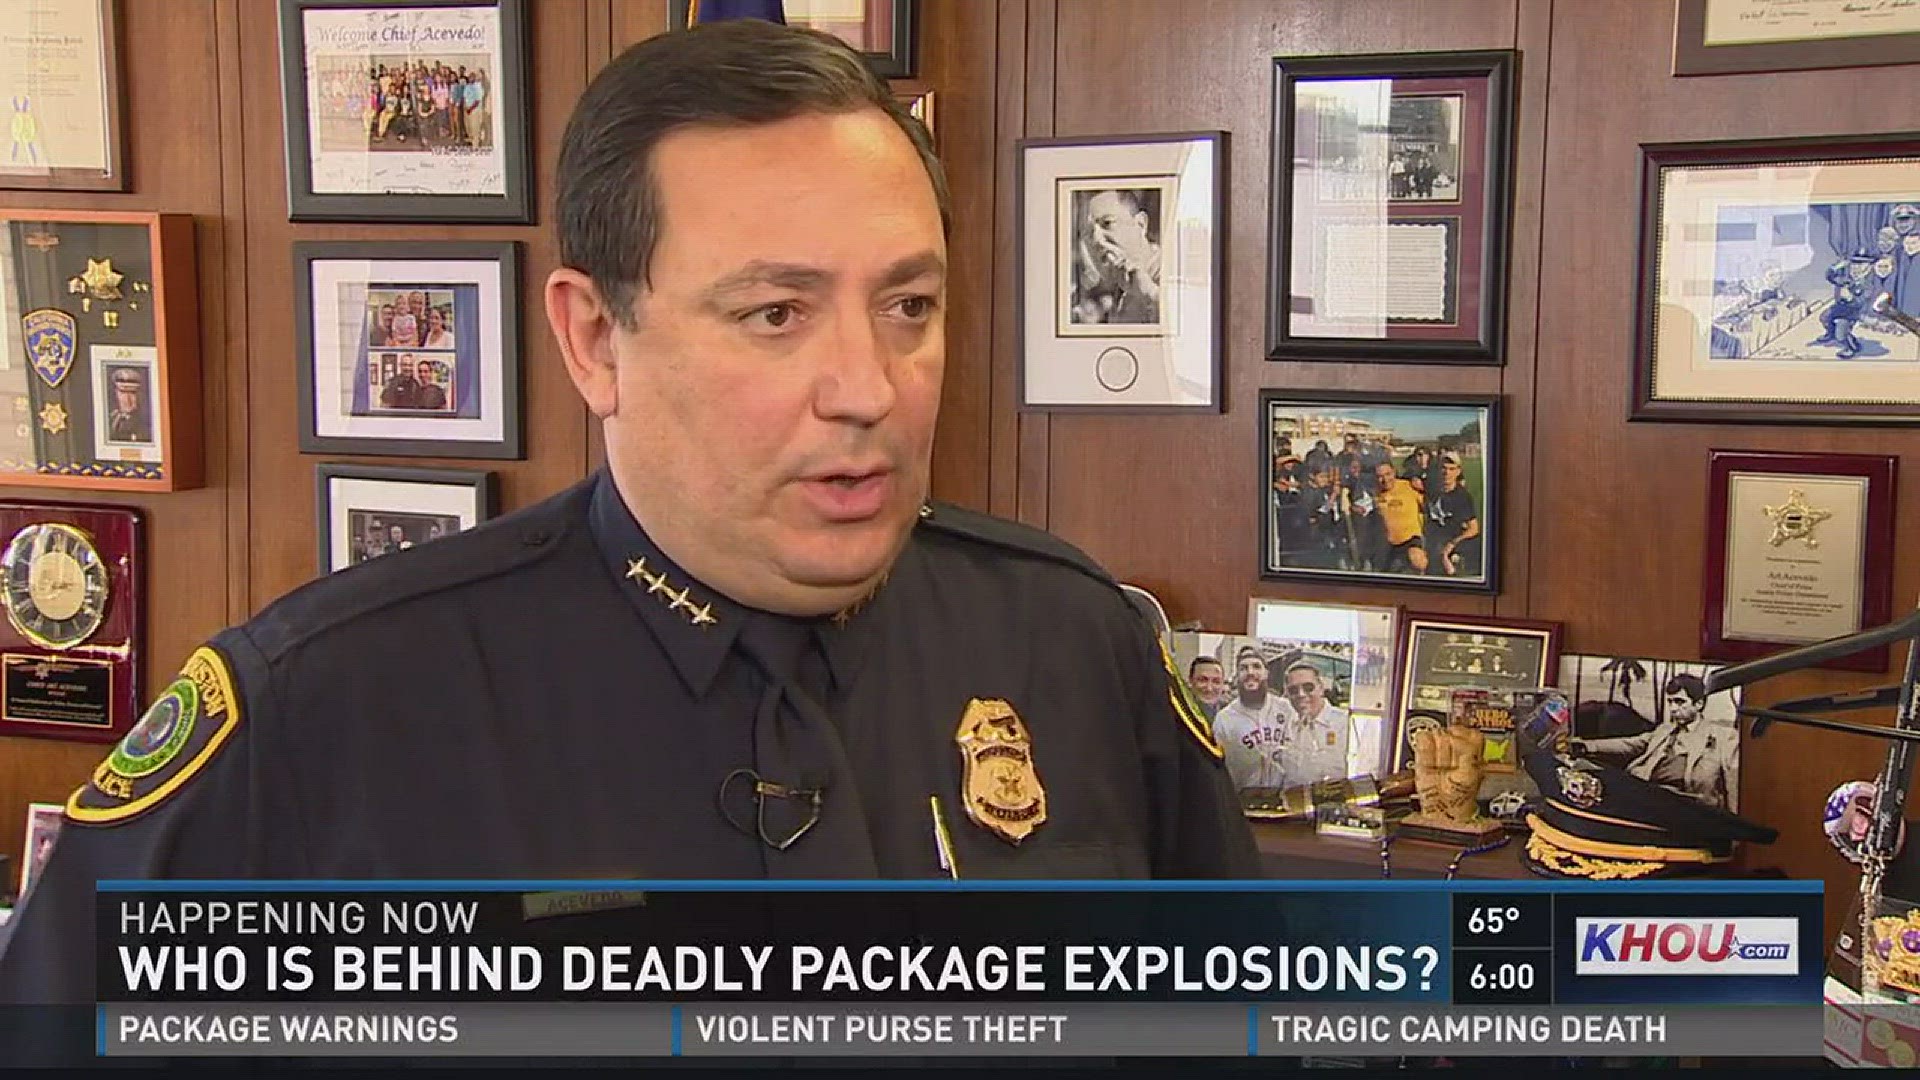 Houston Police Chief Art Acevedo is warning residents in our area to be vigilant after three packages left on door steps in Austin exploded and killed two people.